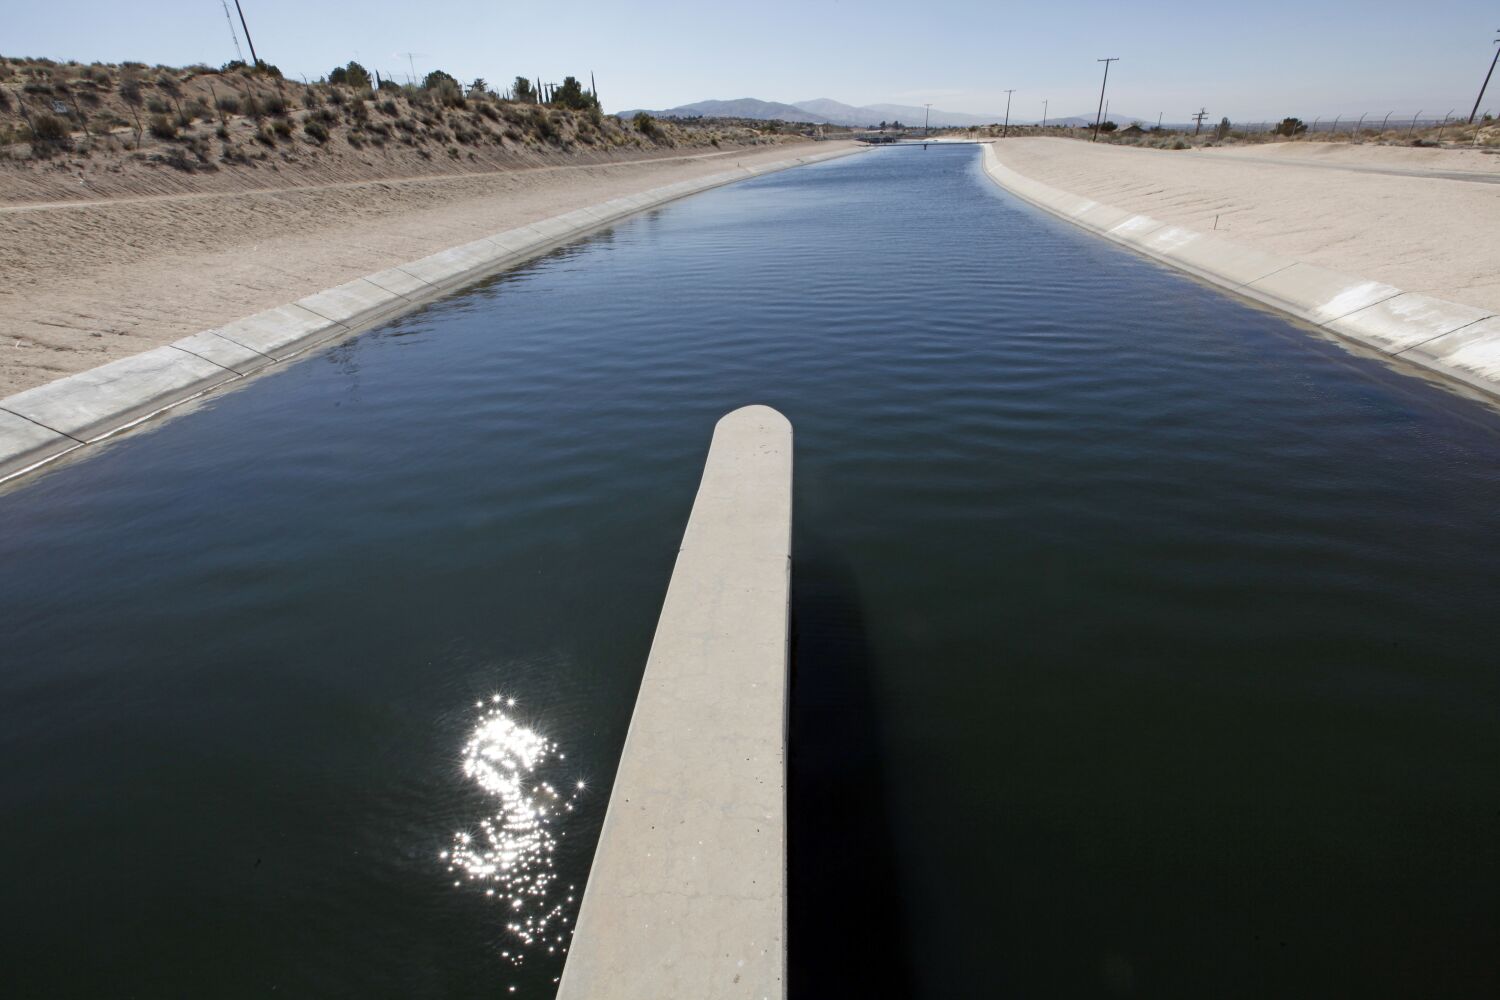 California to get major boost in water supplies following January storms